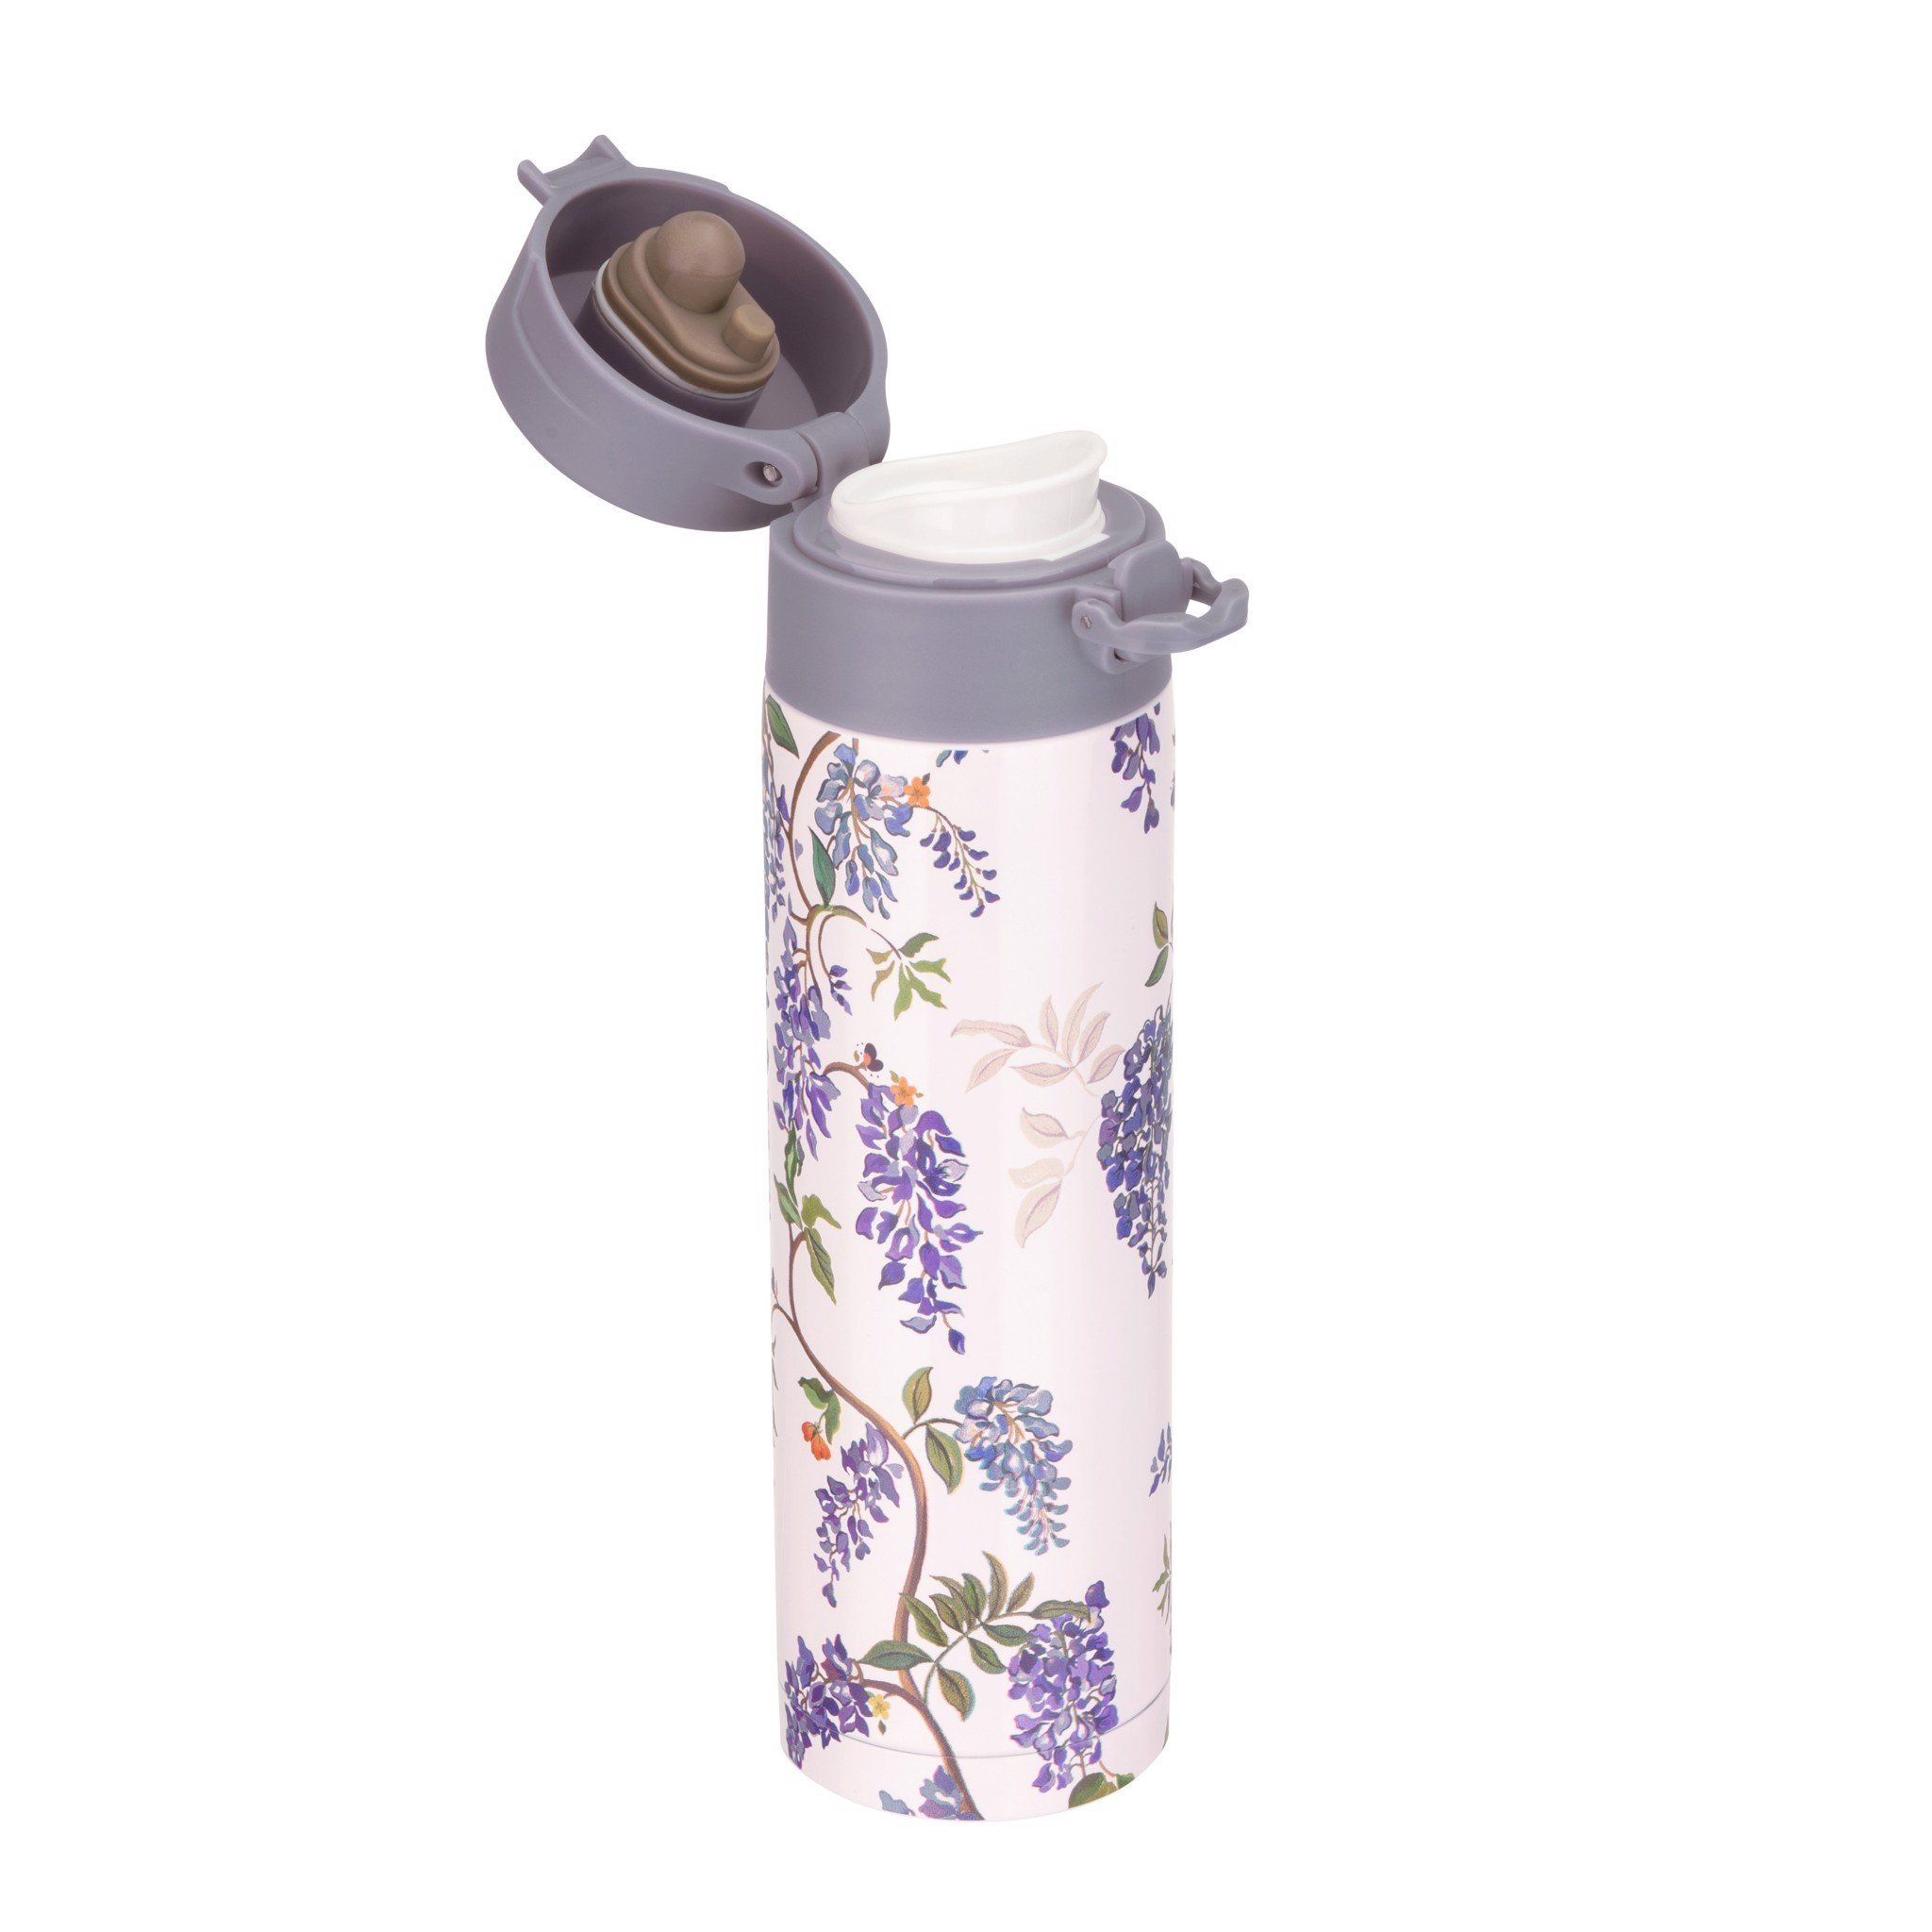  Bình Nước/On the Go - Wisteria Stainless Steel Flask - Multi 